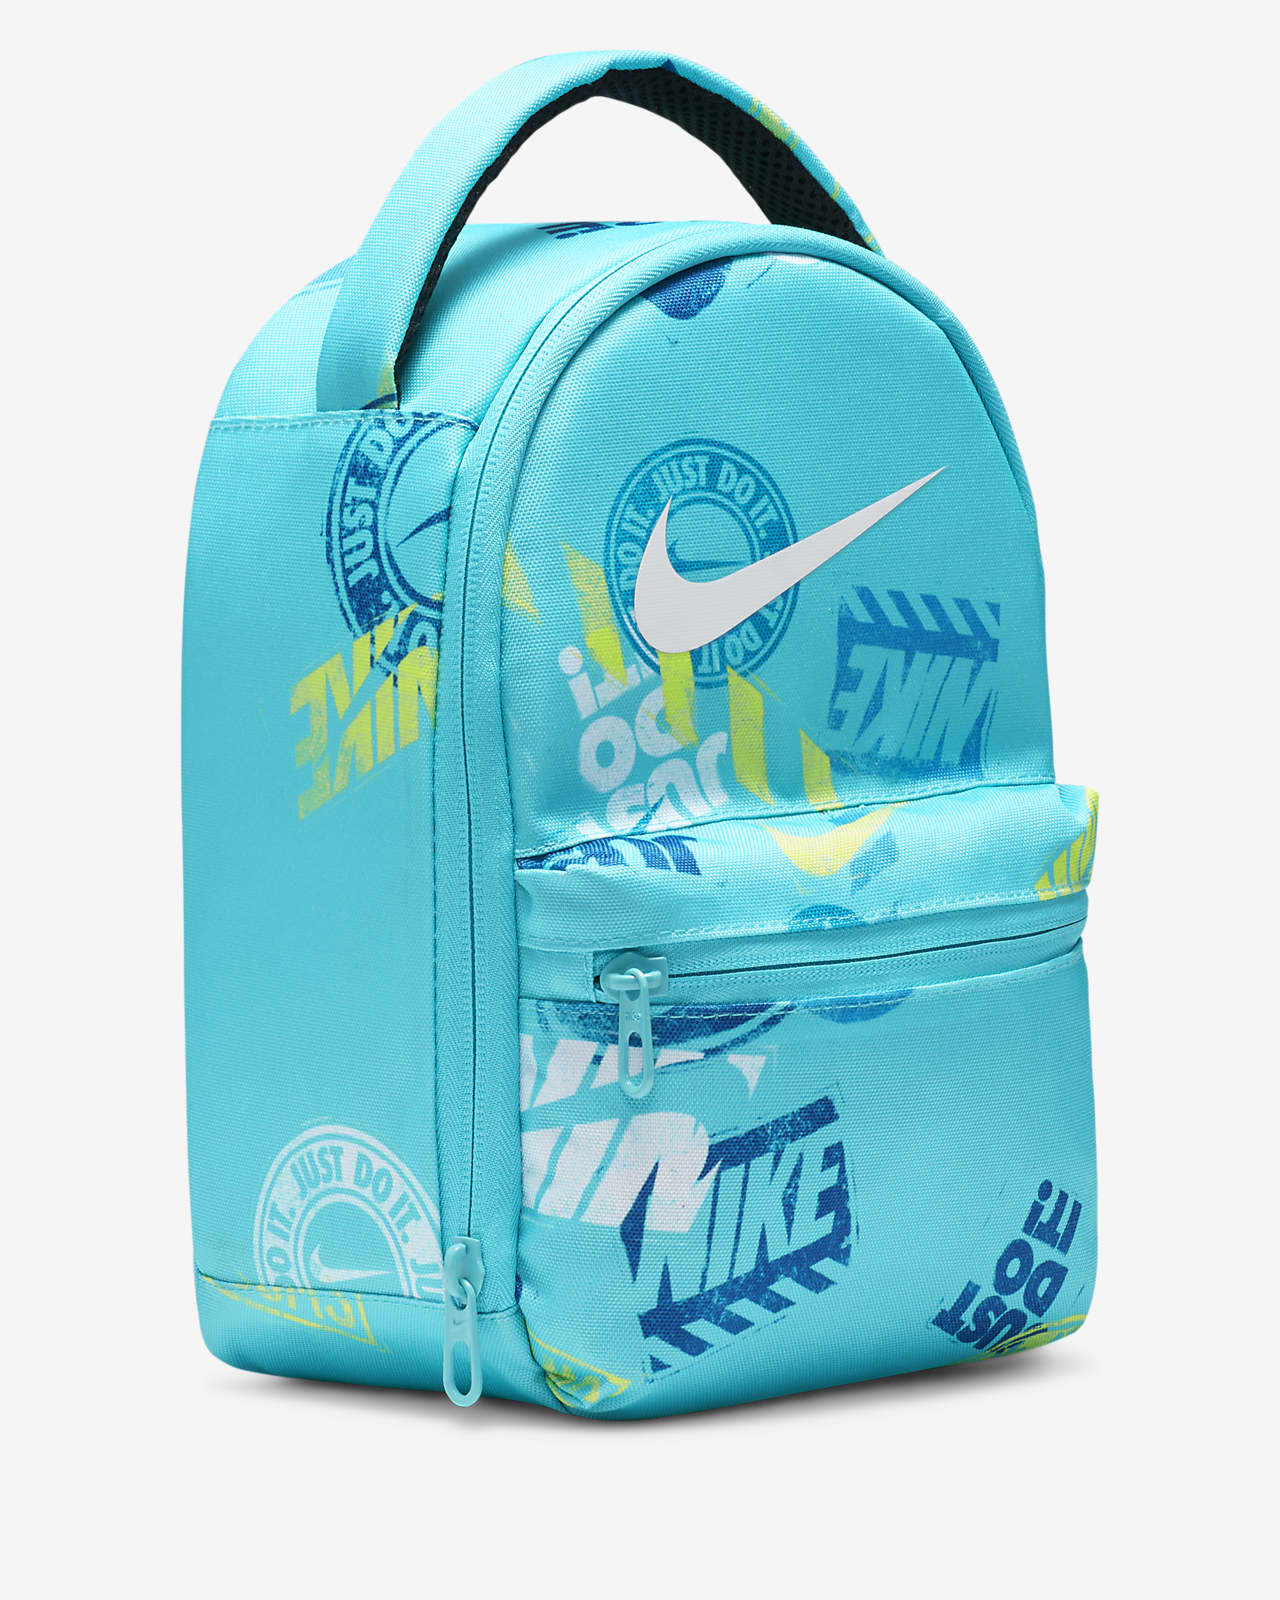 Nike JDI Insulated Lunch Bag - Blue - One Size